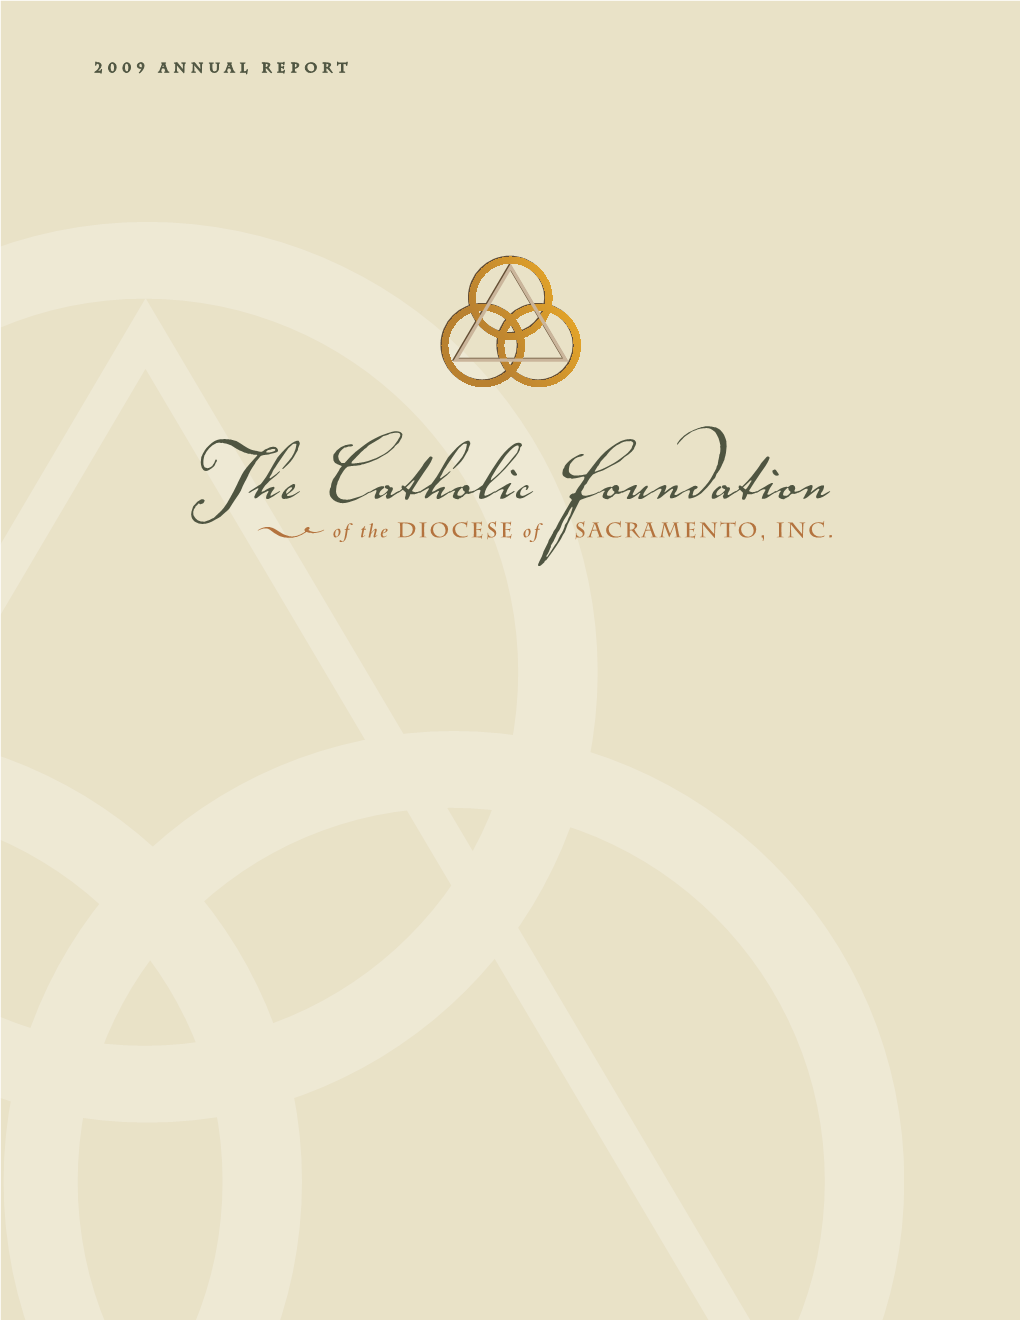 2009 Annual Report of the Catholic Foundation